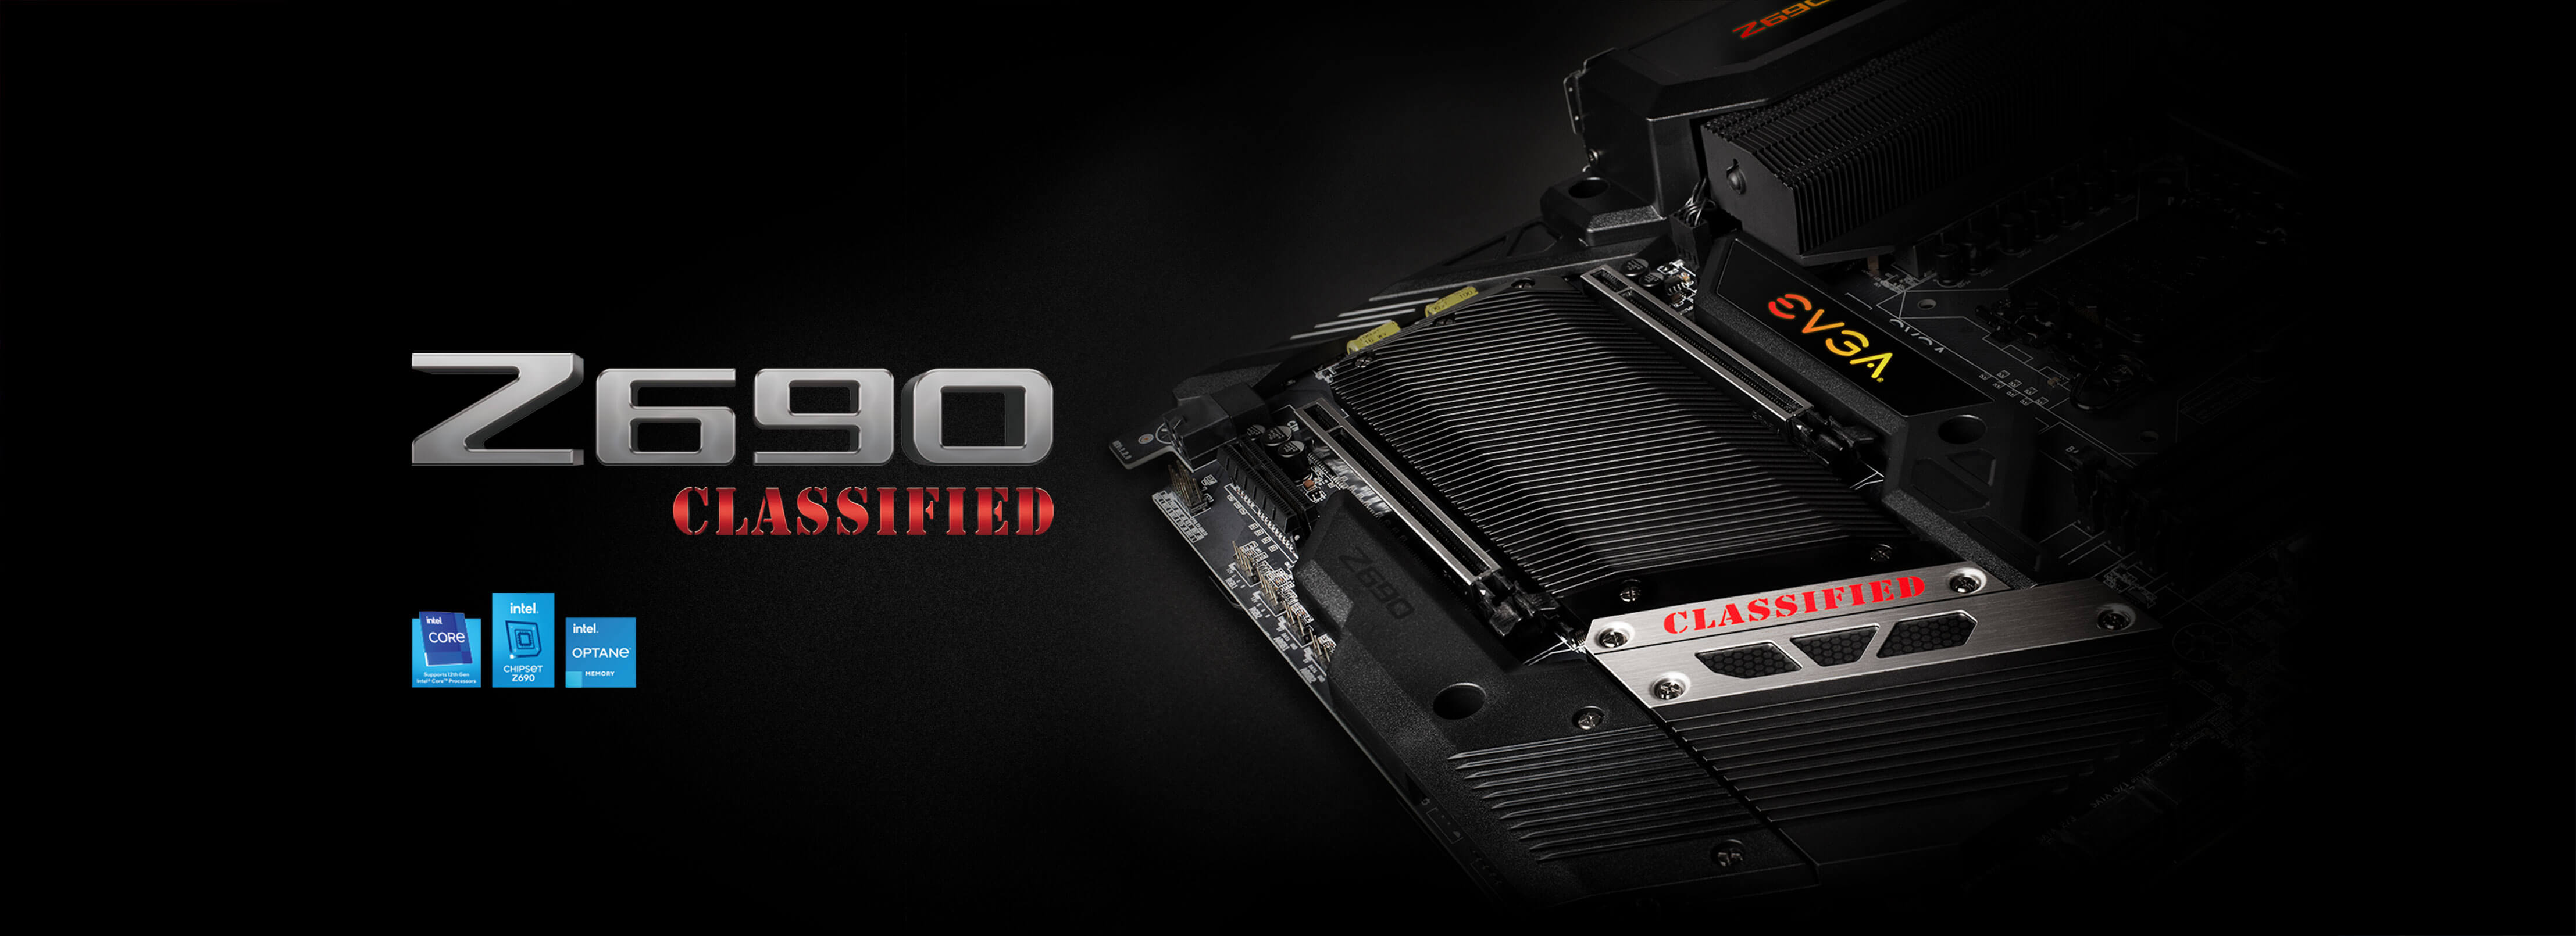 EVGA Z690 Classified Motherboards